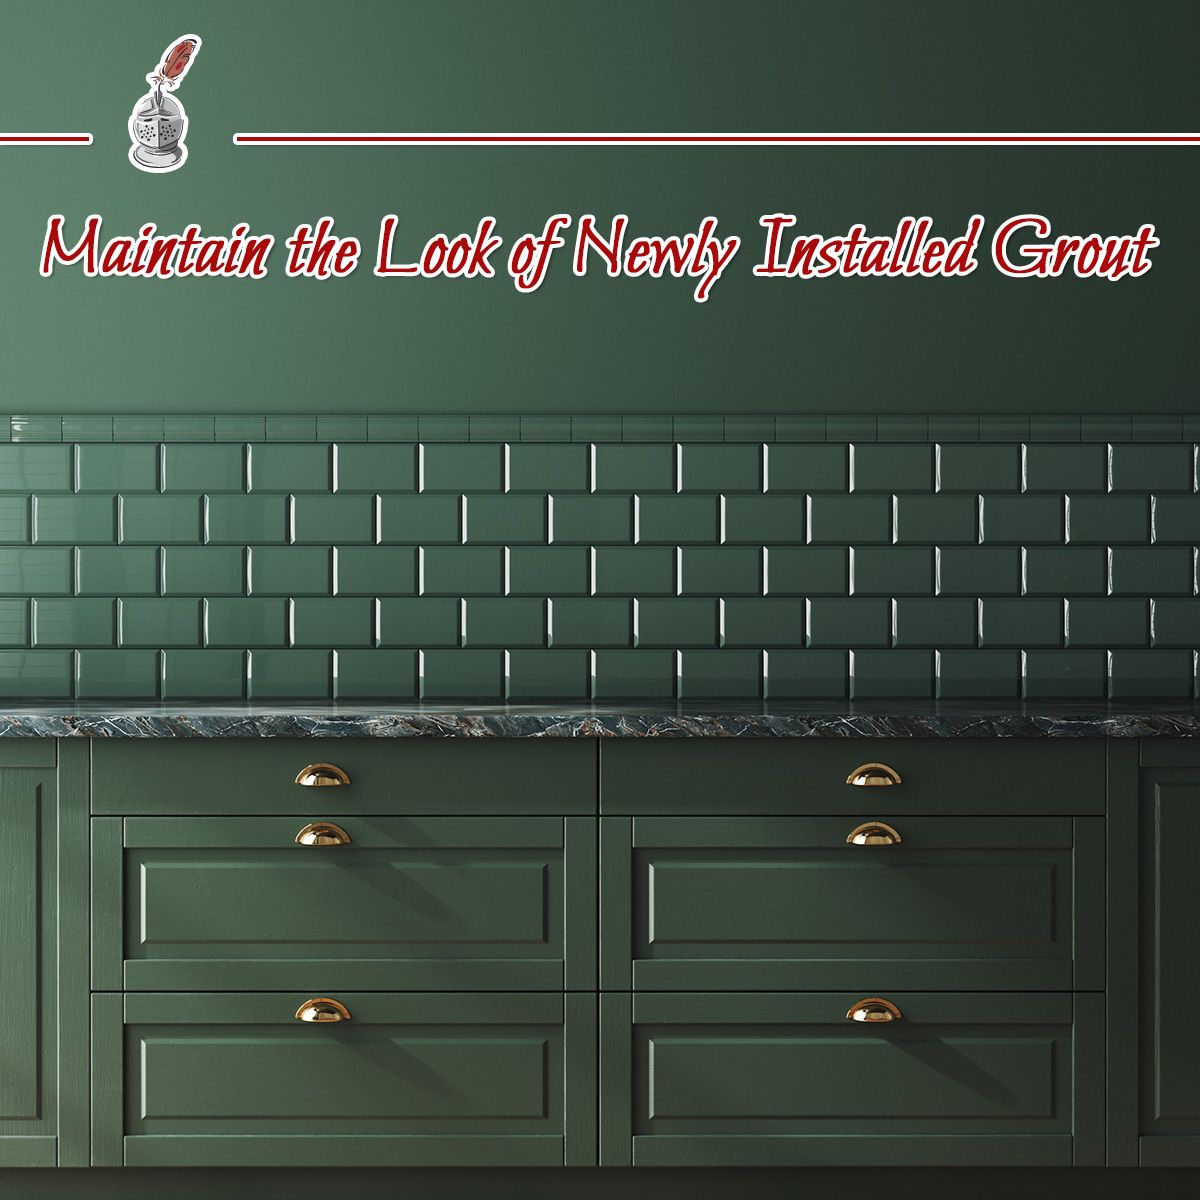 Maintain the Look of Newly Installed Grout